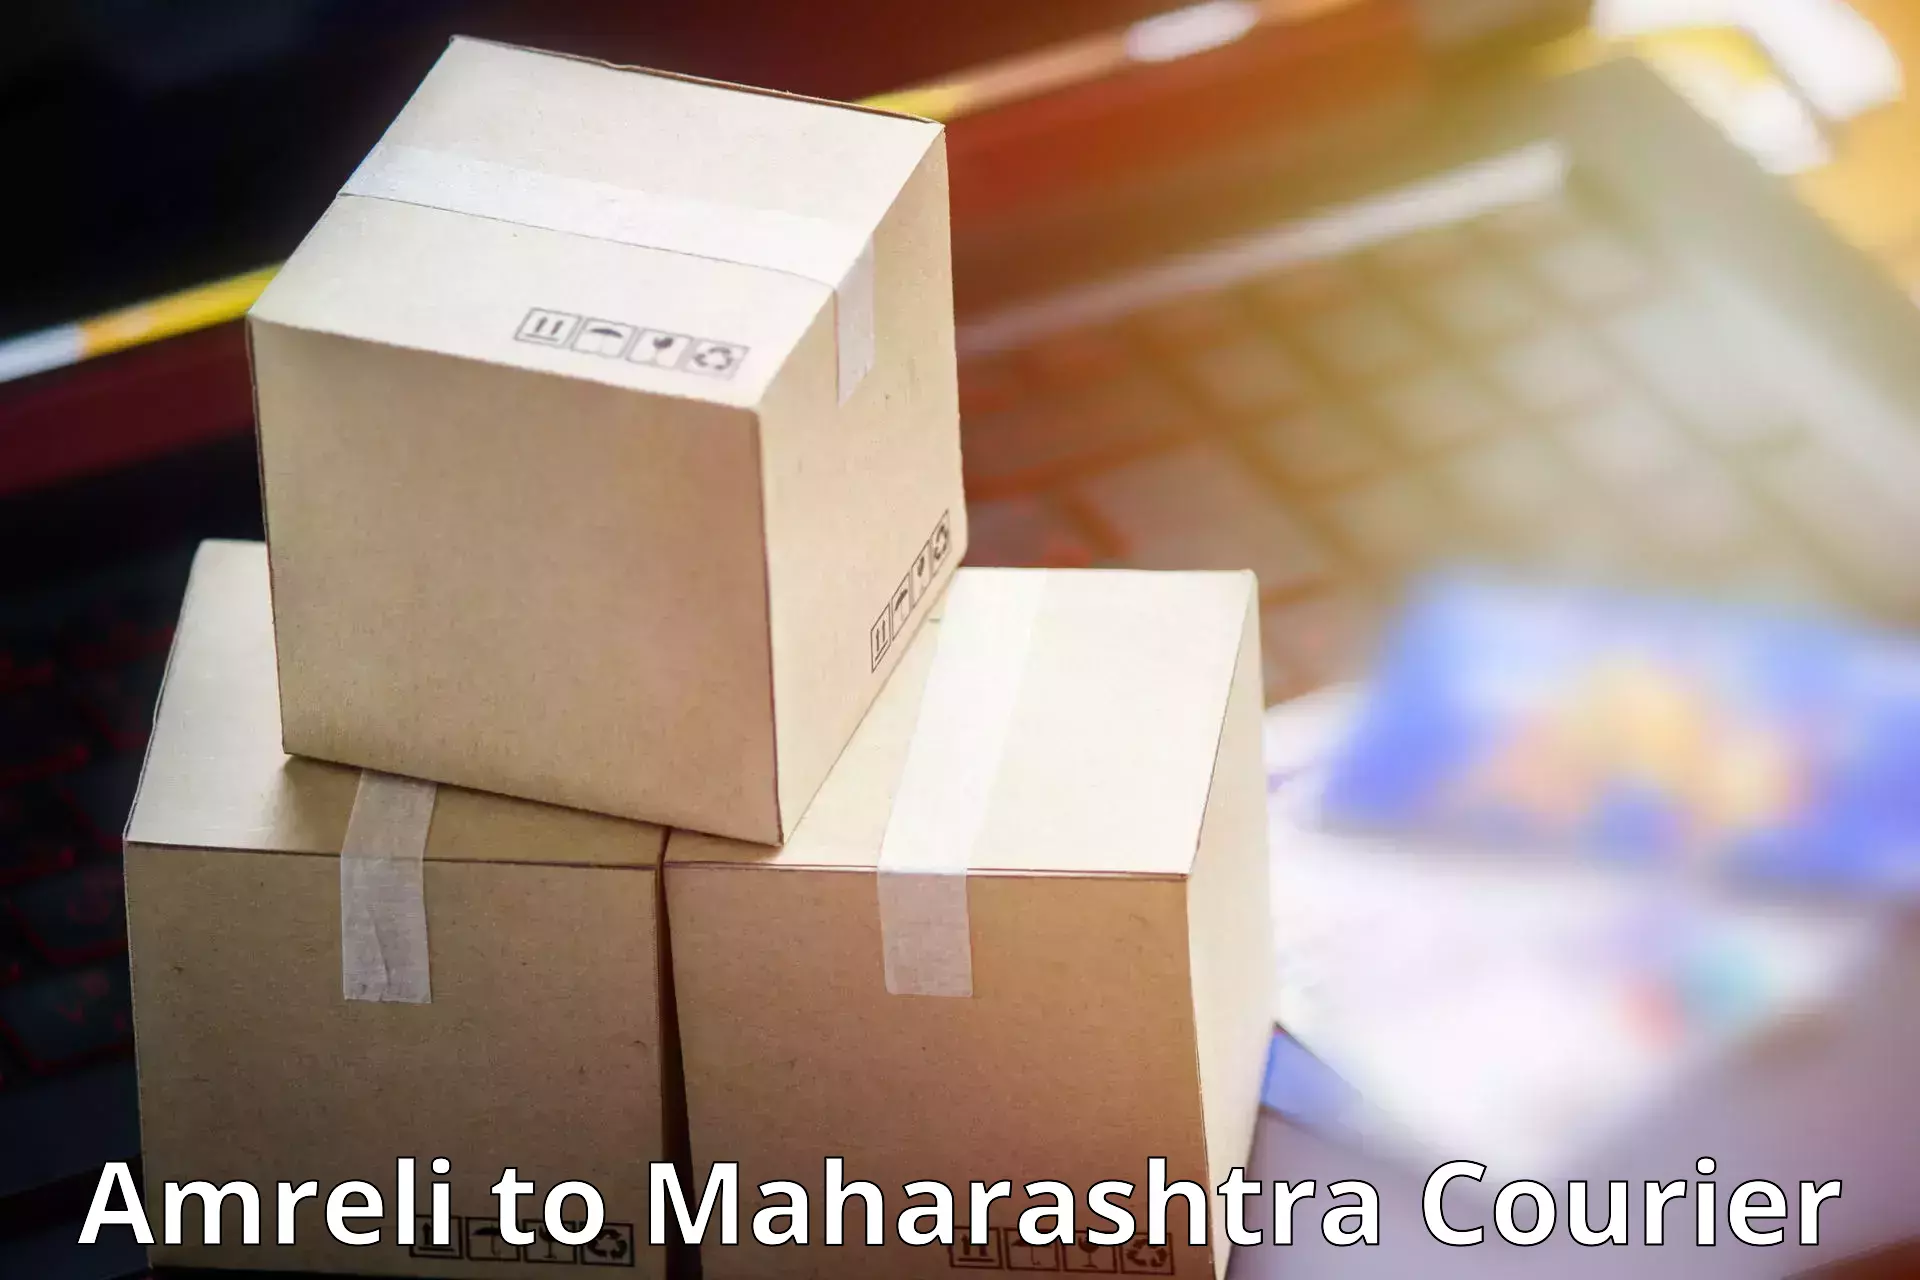 Courier service booking Amreli to Ahmedpur